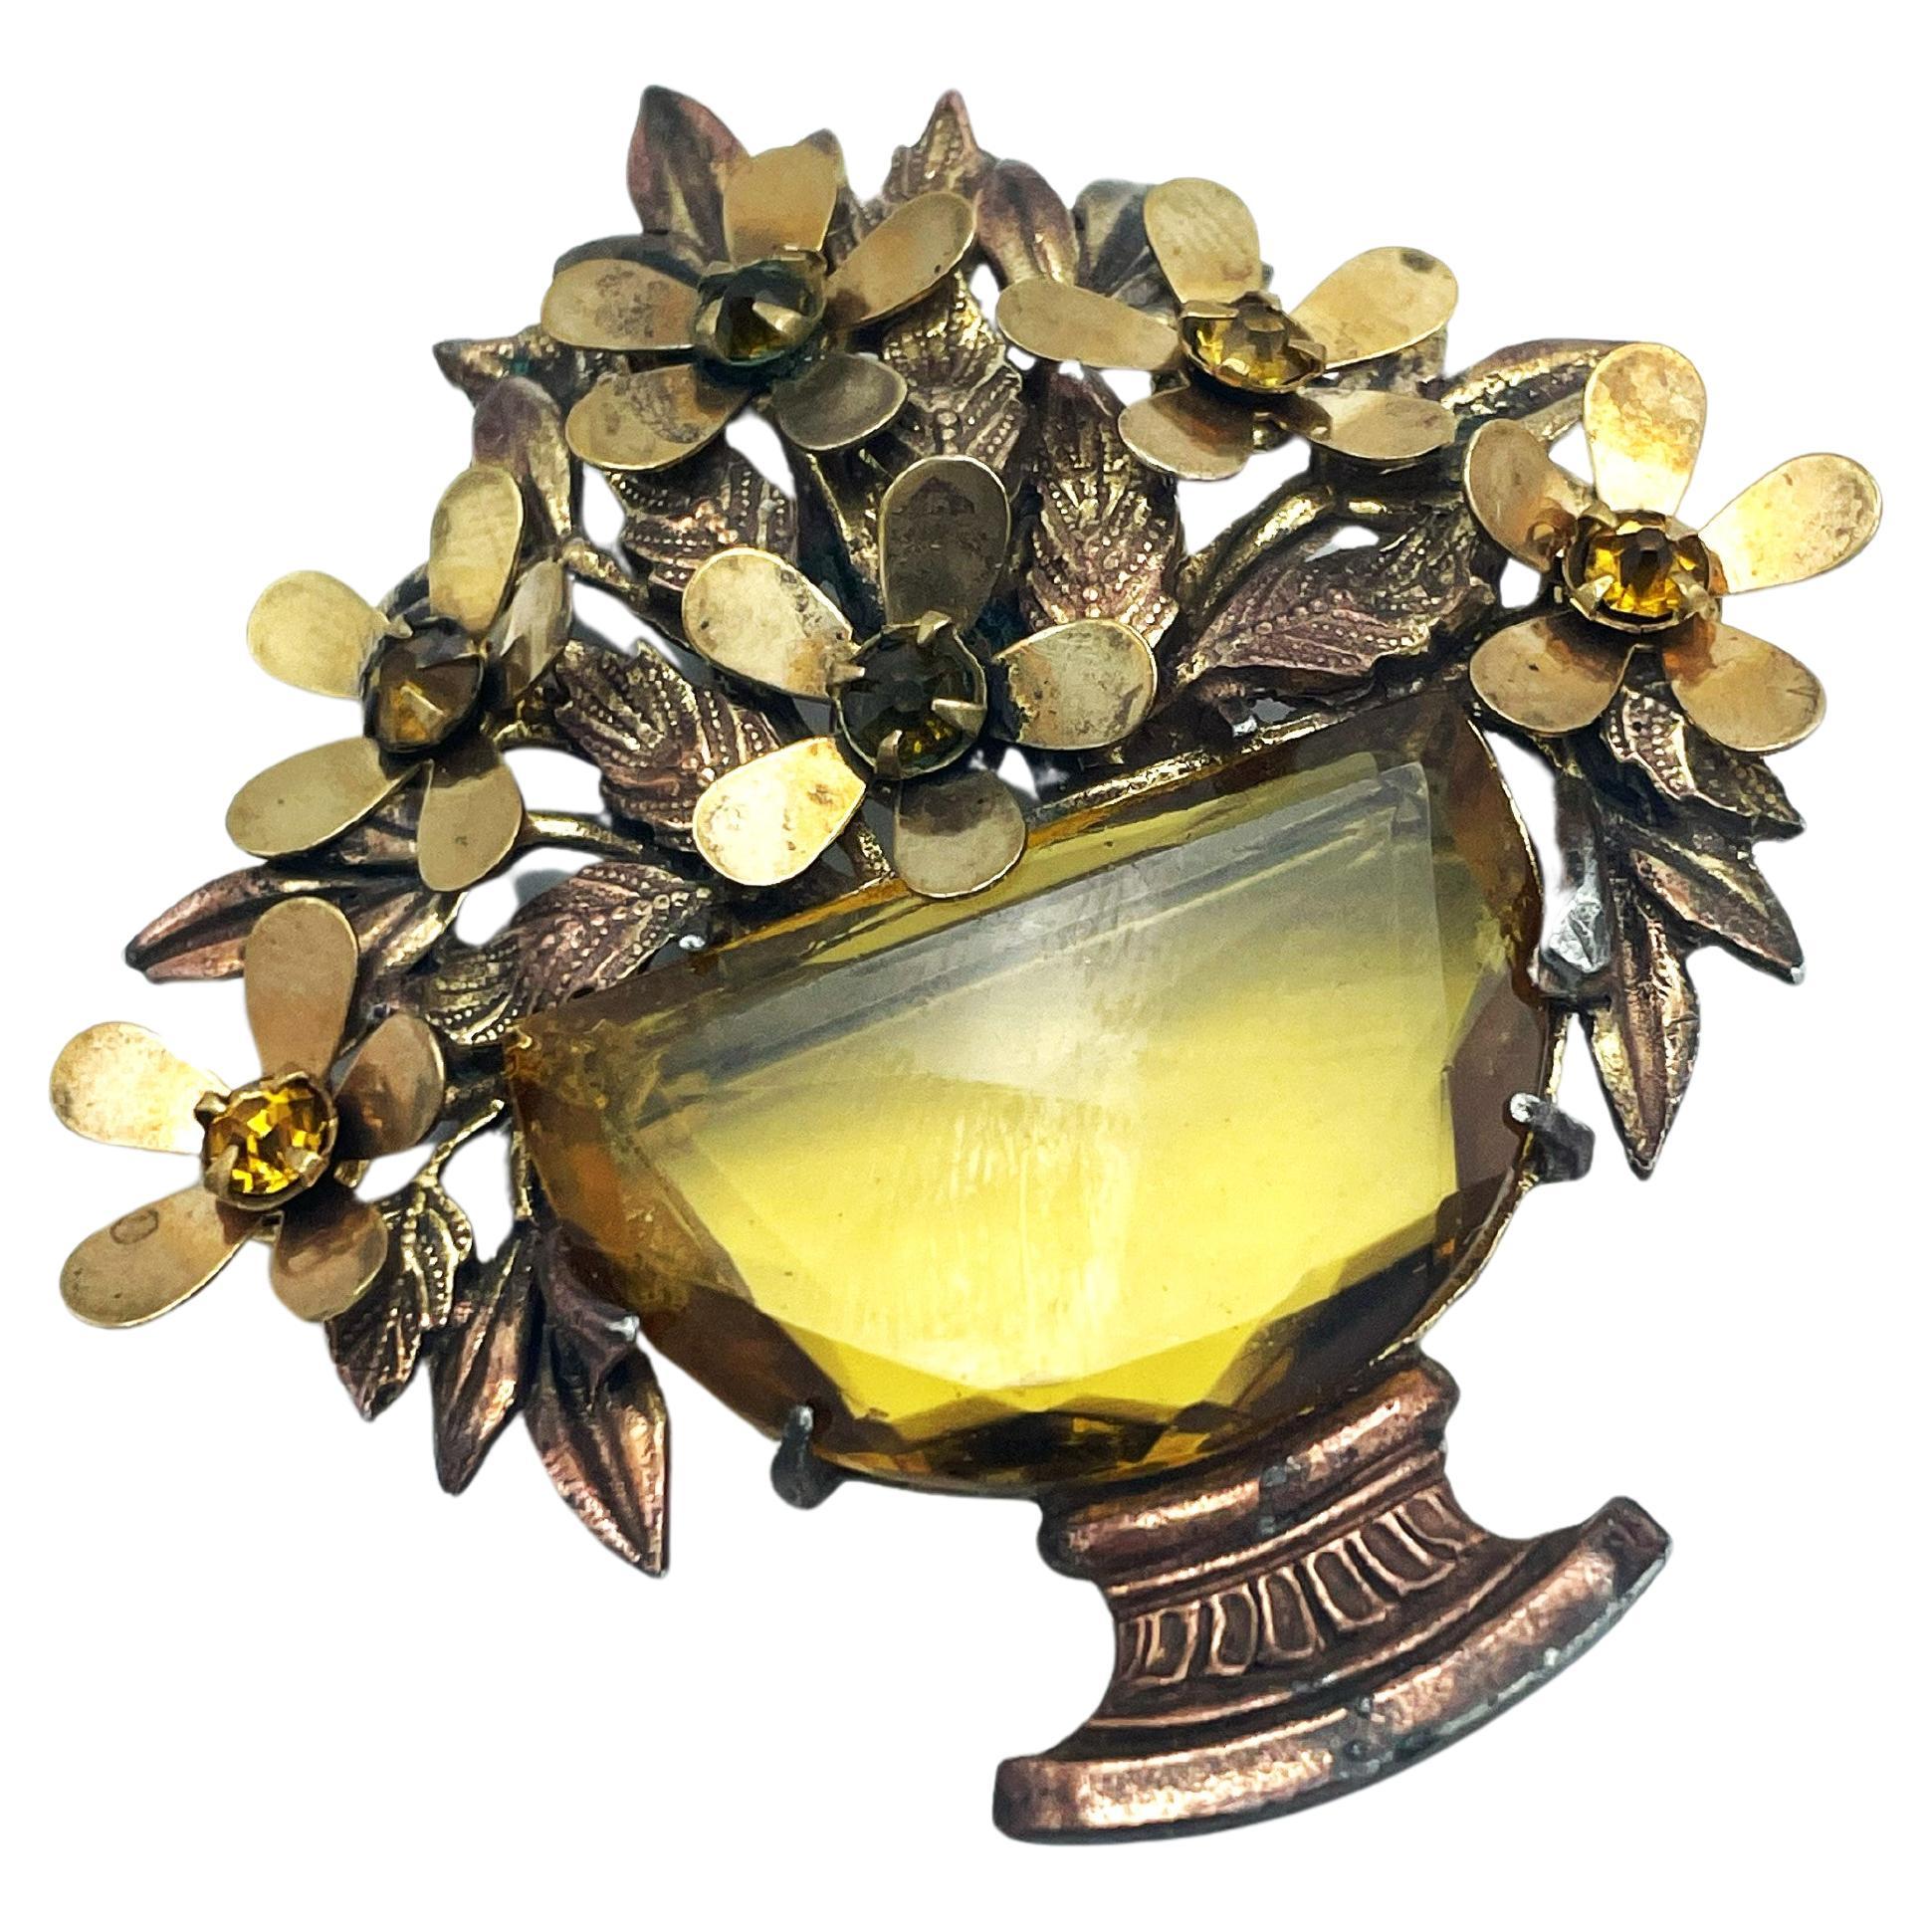 Brooch in the shape of a flower basket with a large topas  cut rhinestone as the flower vase inside are golden flowers with small gold rhinestones.
The brooch was designed in the USA in 1940, is unsigned and shown in 